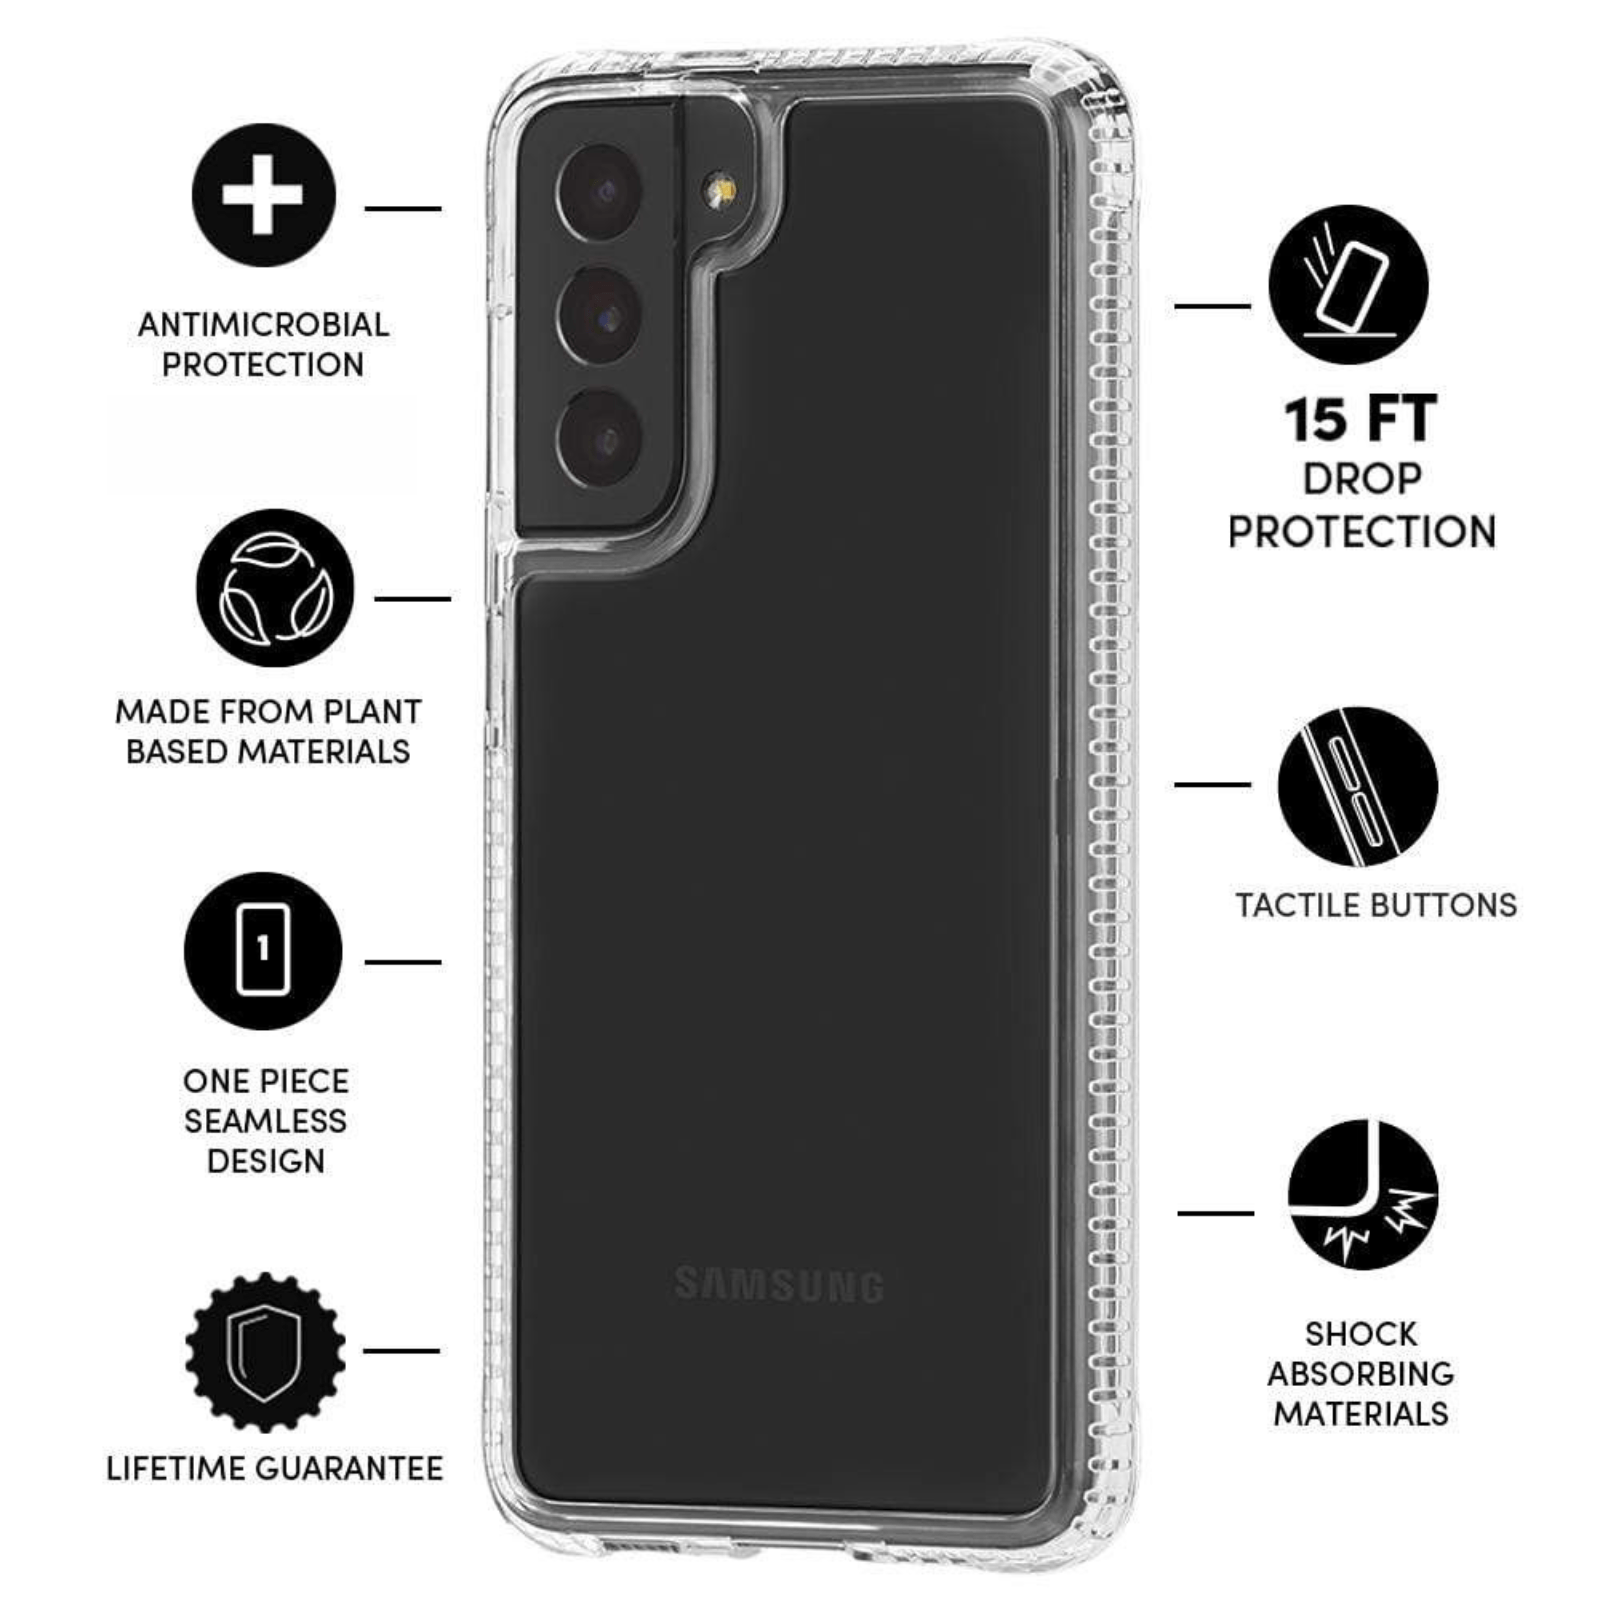 Features Antimicrobial Protection, Made from Plant Based Materials, One Piece Seamless Design, Lifetime Guarantee, 15 Ft Drop protection, Tactile Buttons, Shock Absorbing Materials. color::Clear